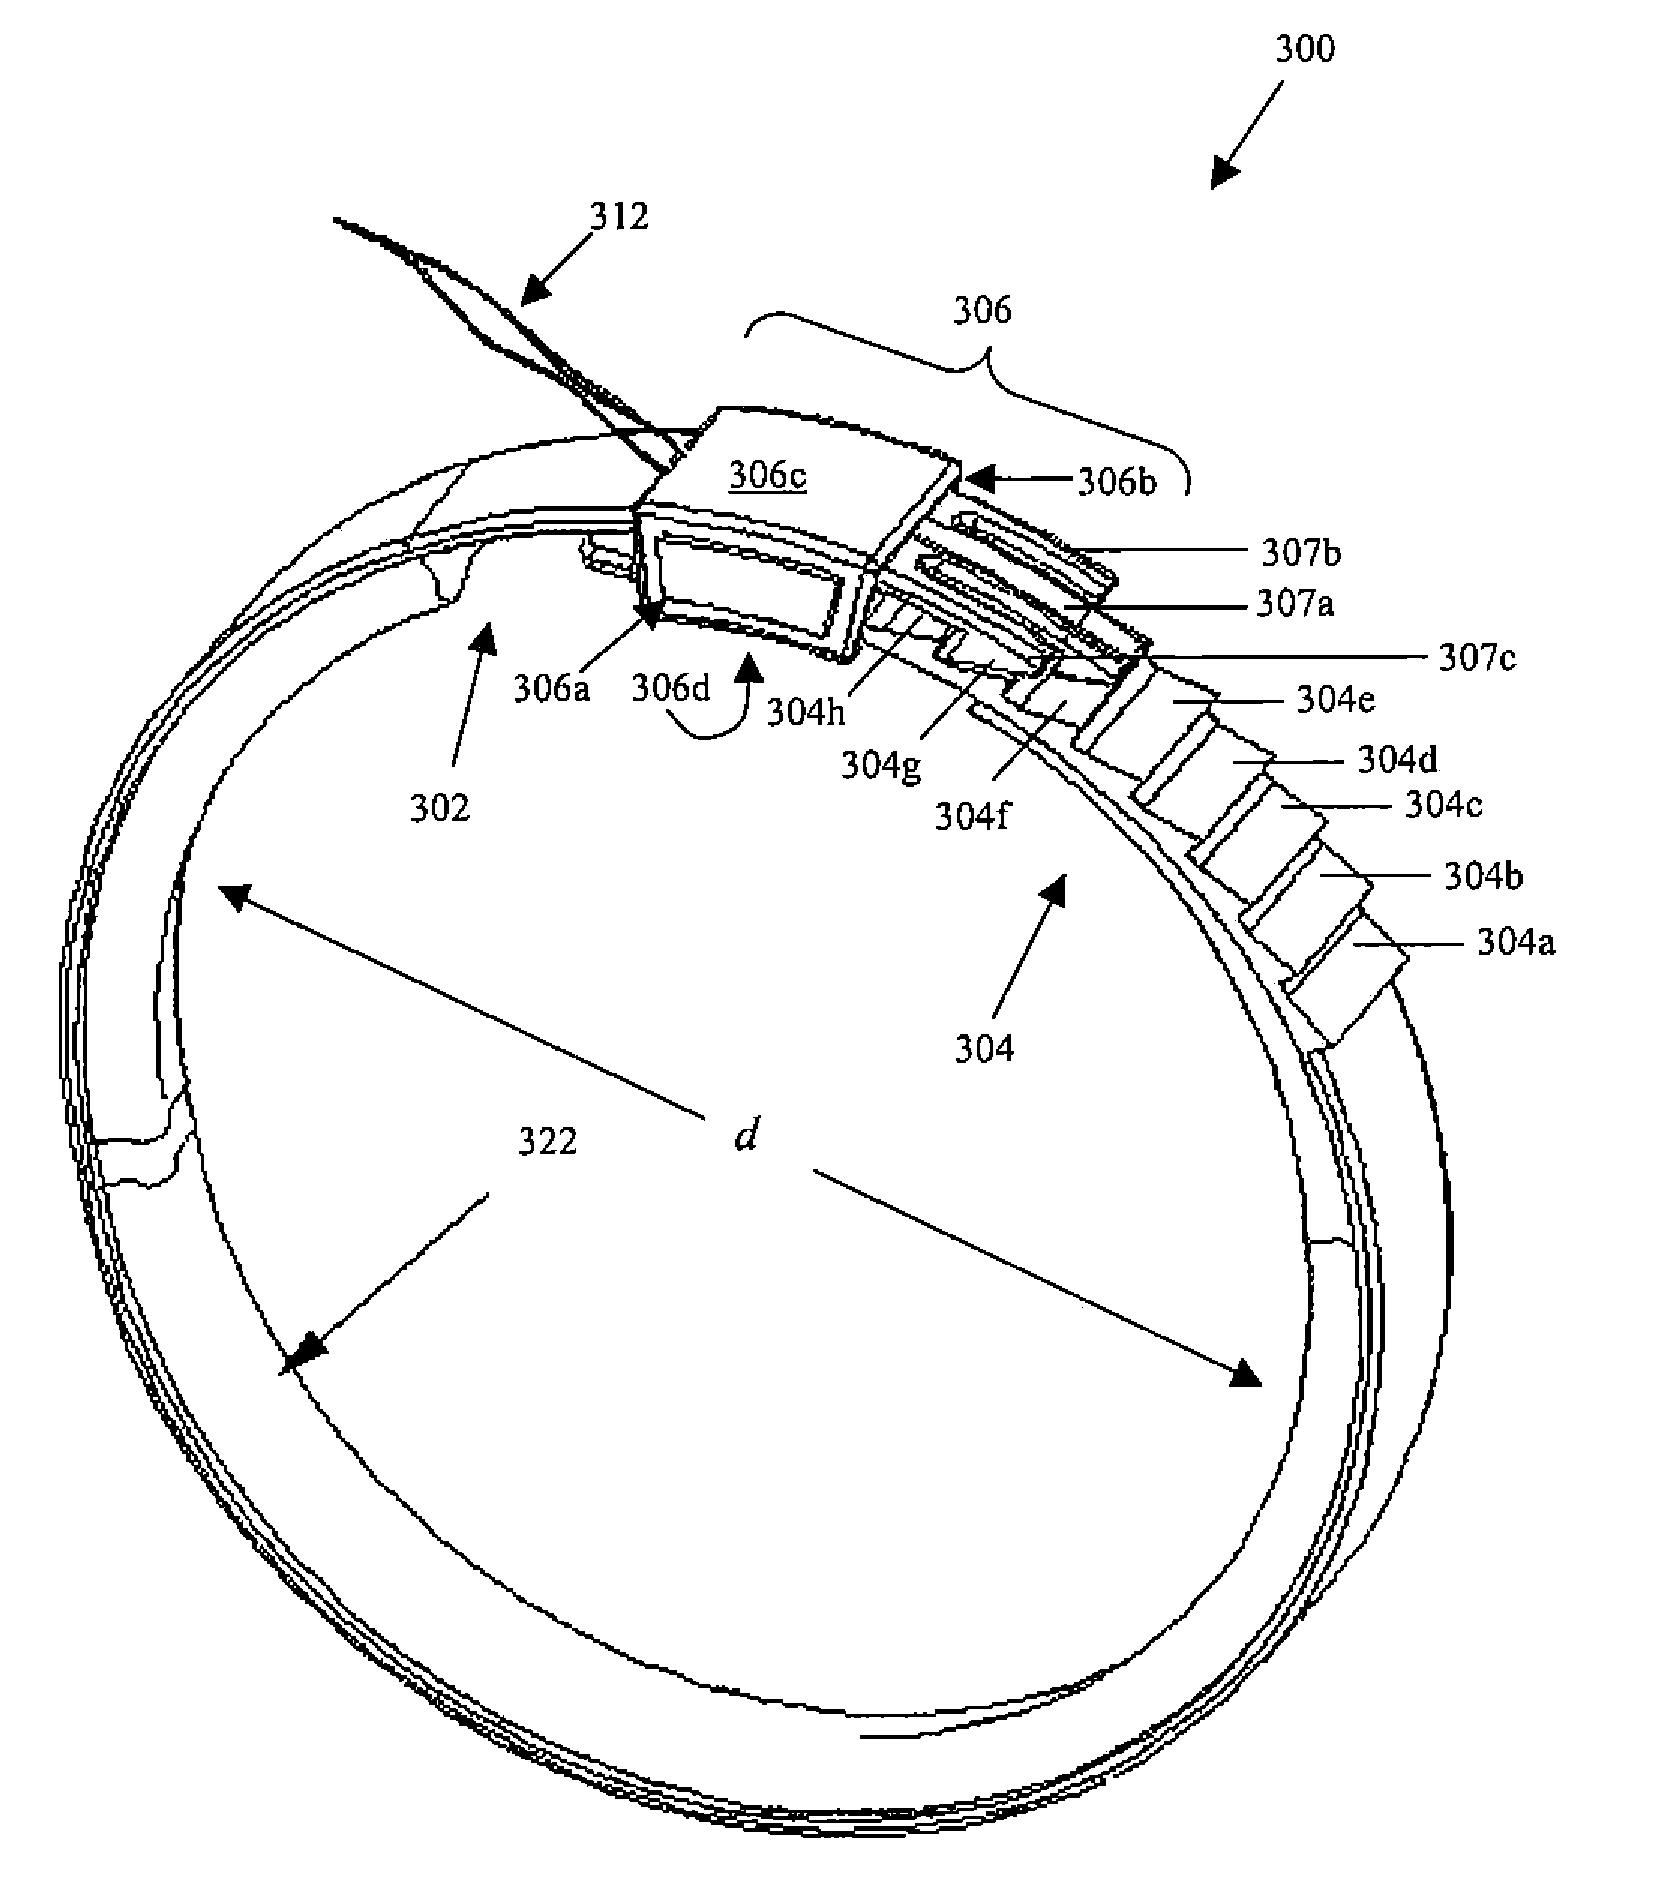 Electroactive polymer actuated gastric band